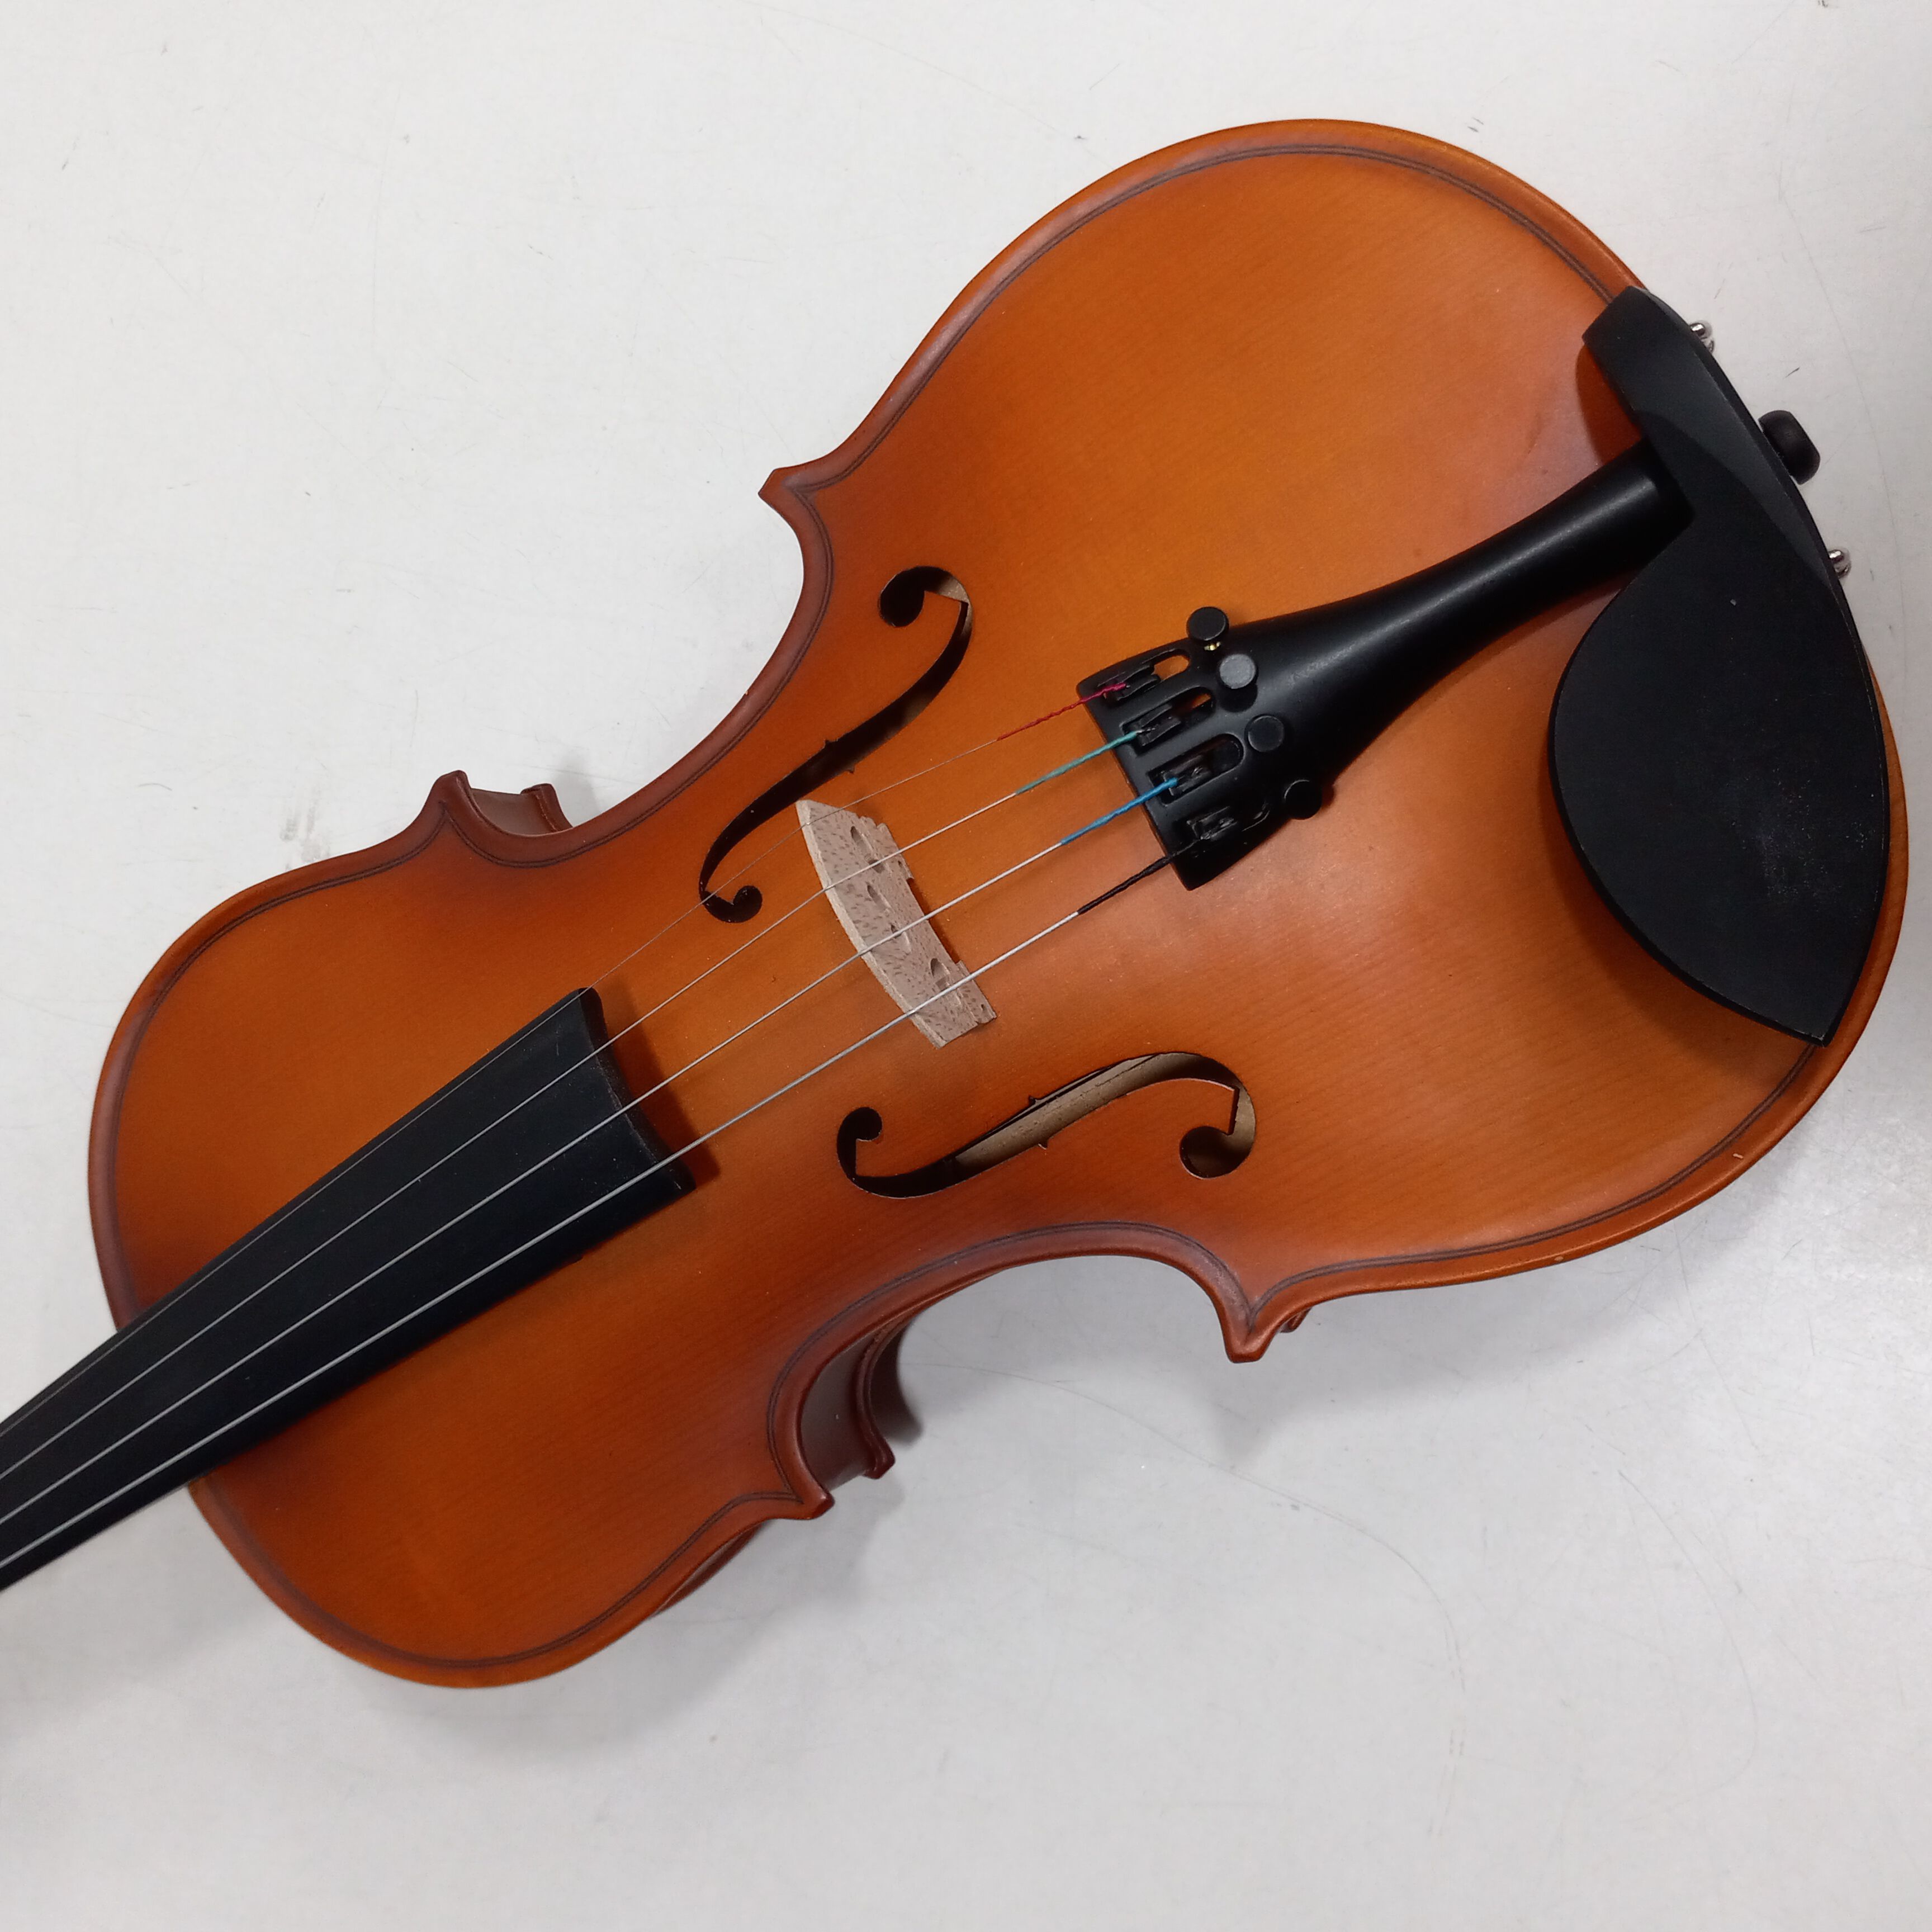 Mendini By Celicio Violin 3/4 Size In Case With Strings, Resin, Chin Rest,  And Bow